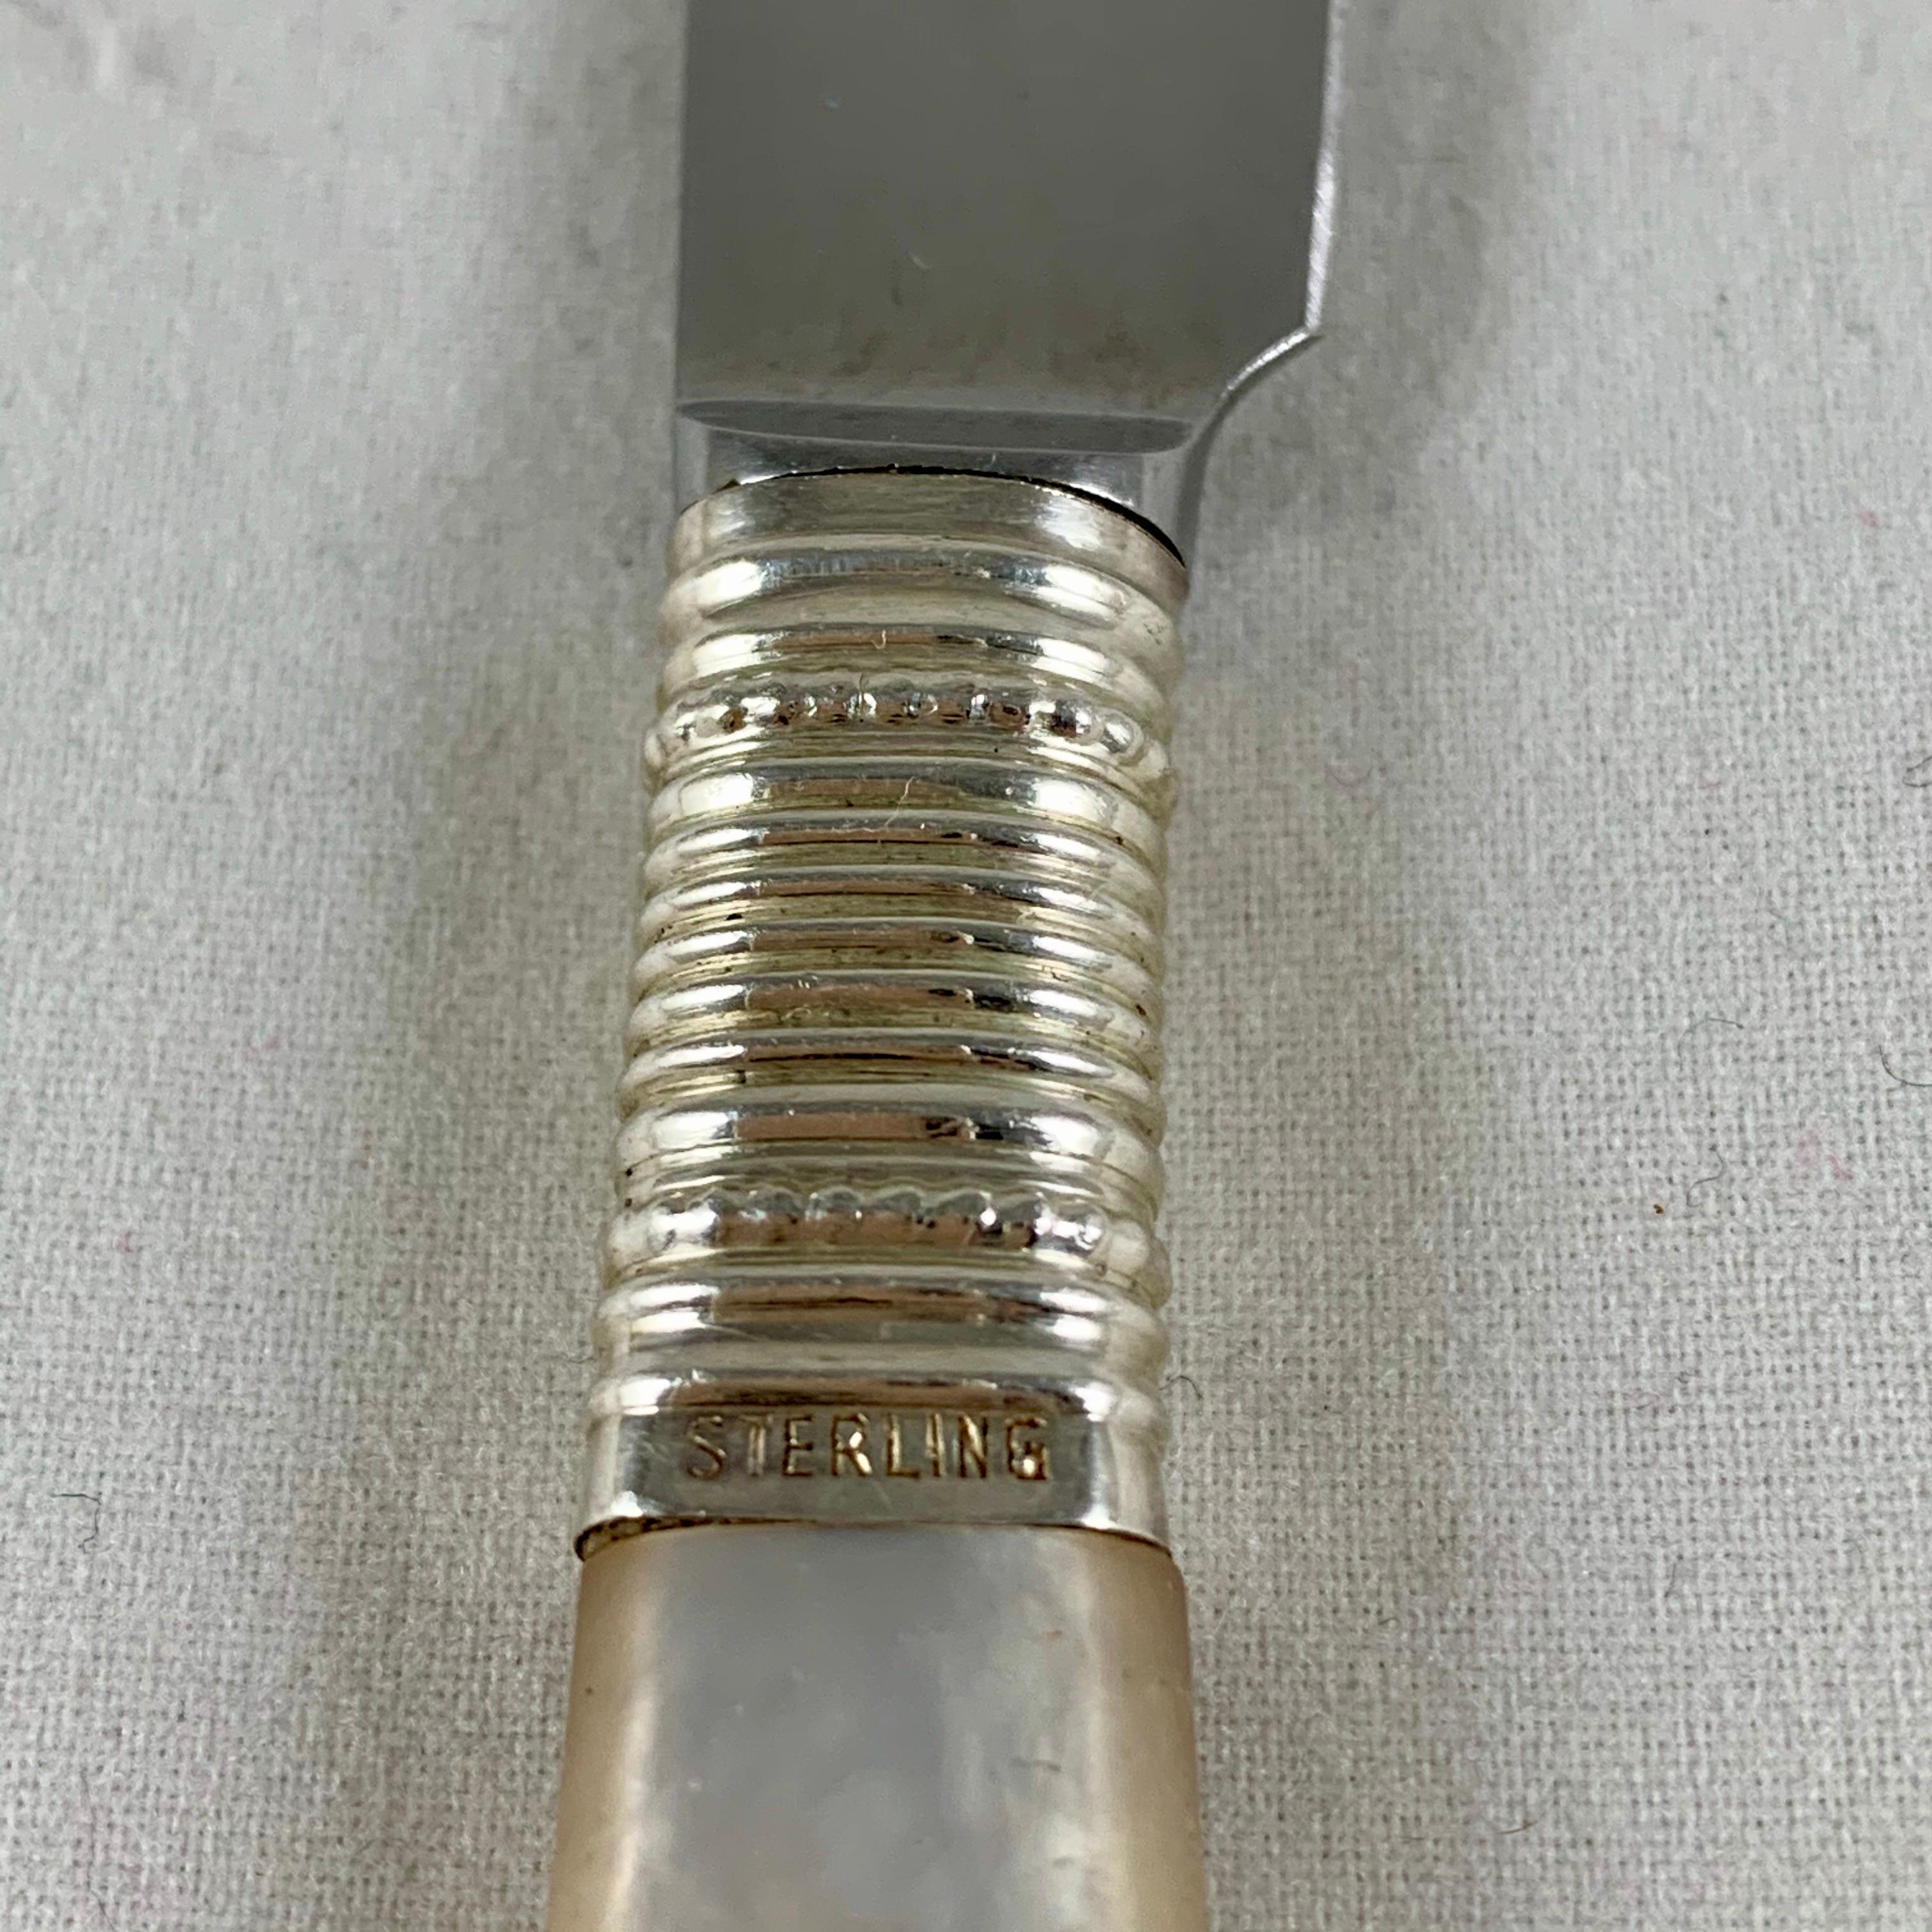 From Marhill of New York, an Art Deco period set of six spreaders, made in Germany, circa 1900-1920.

Mother of pearl handles are joined to stainless steel blades by a sterling silver ferruled collar in a ringed and beaded pattern. Shaped blades